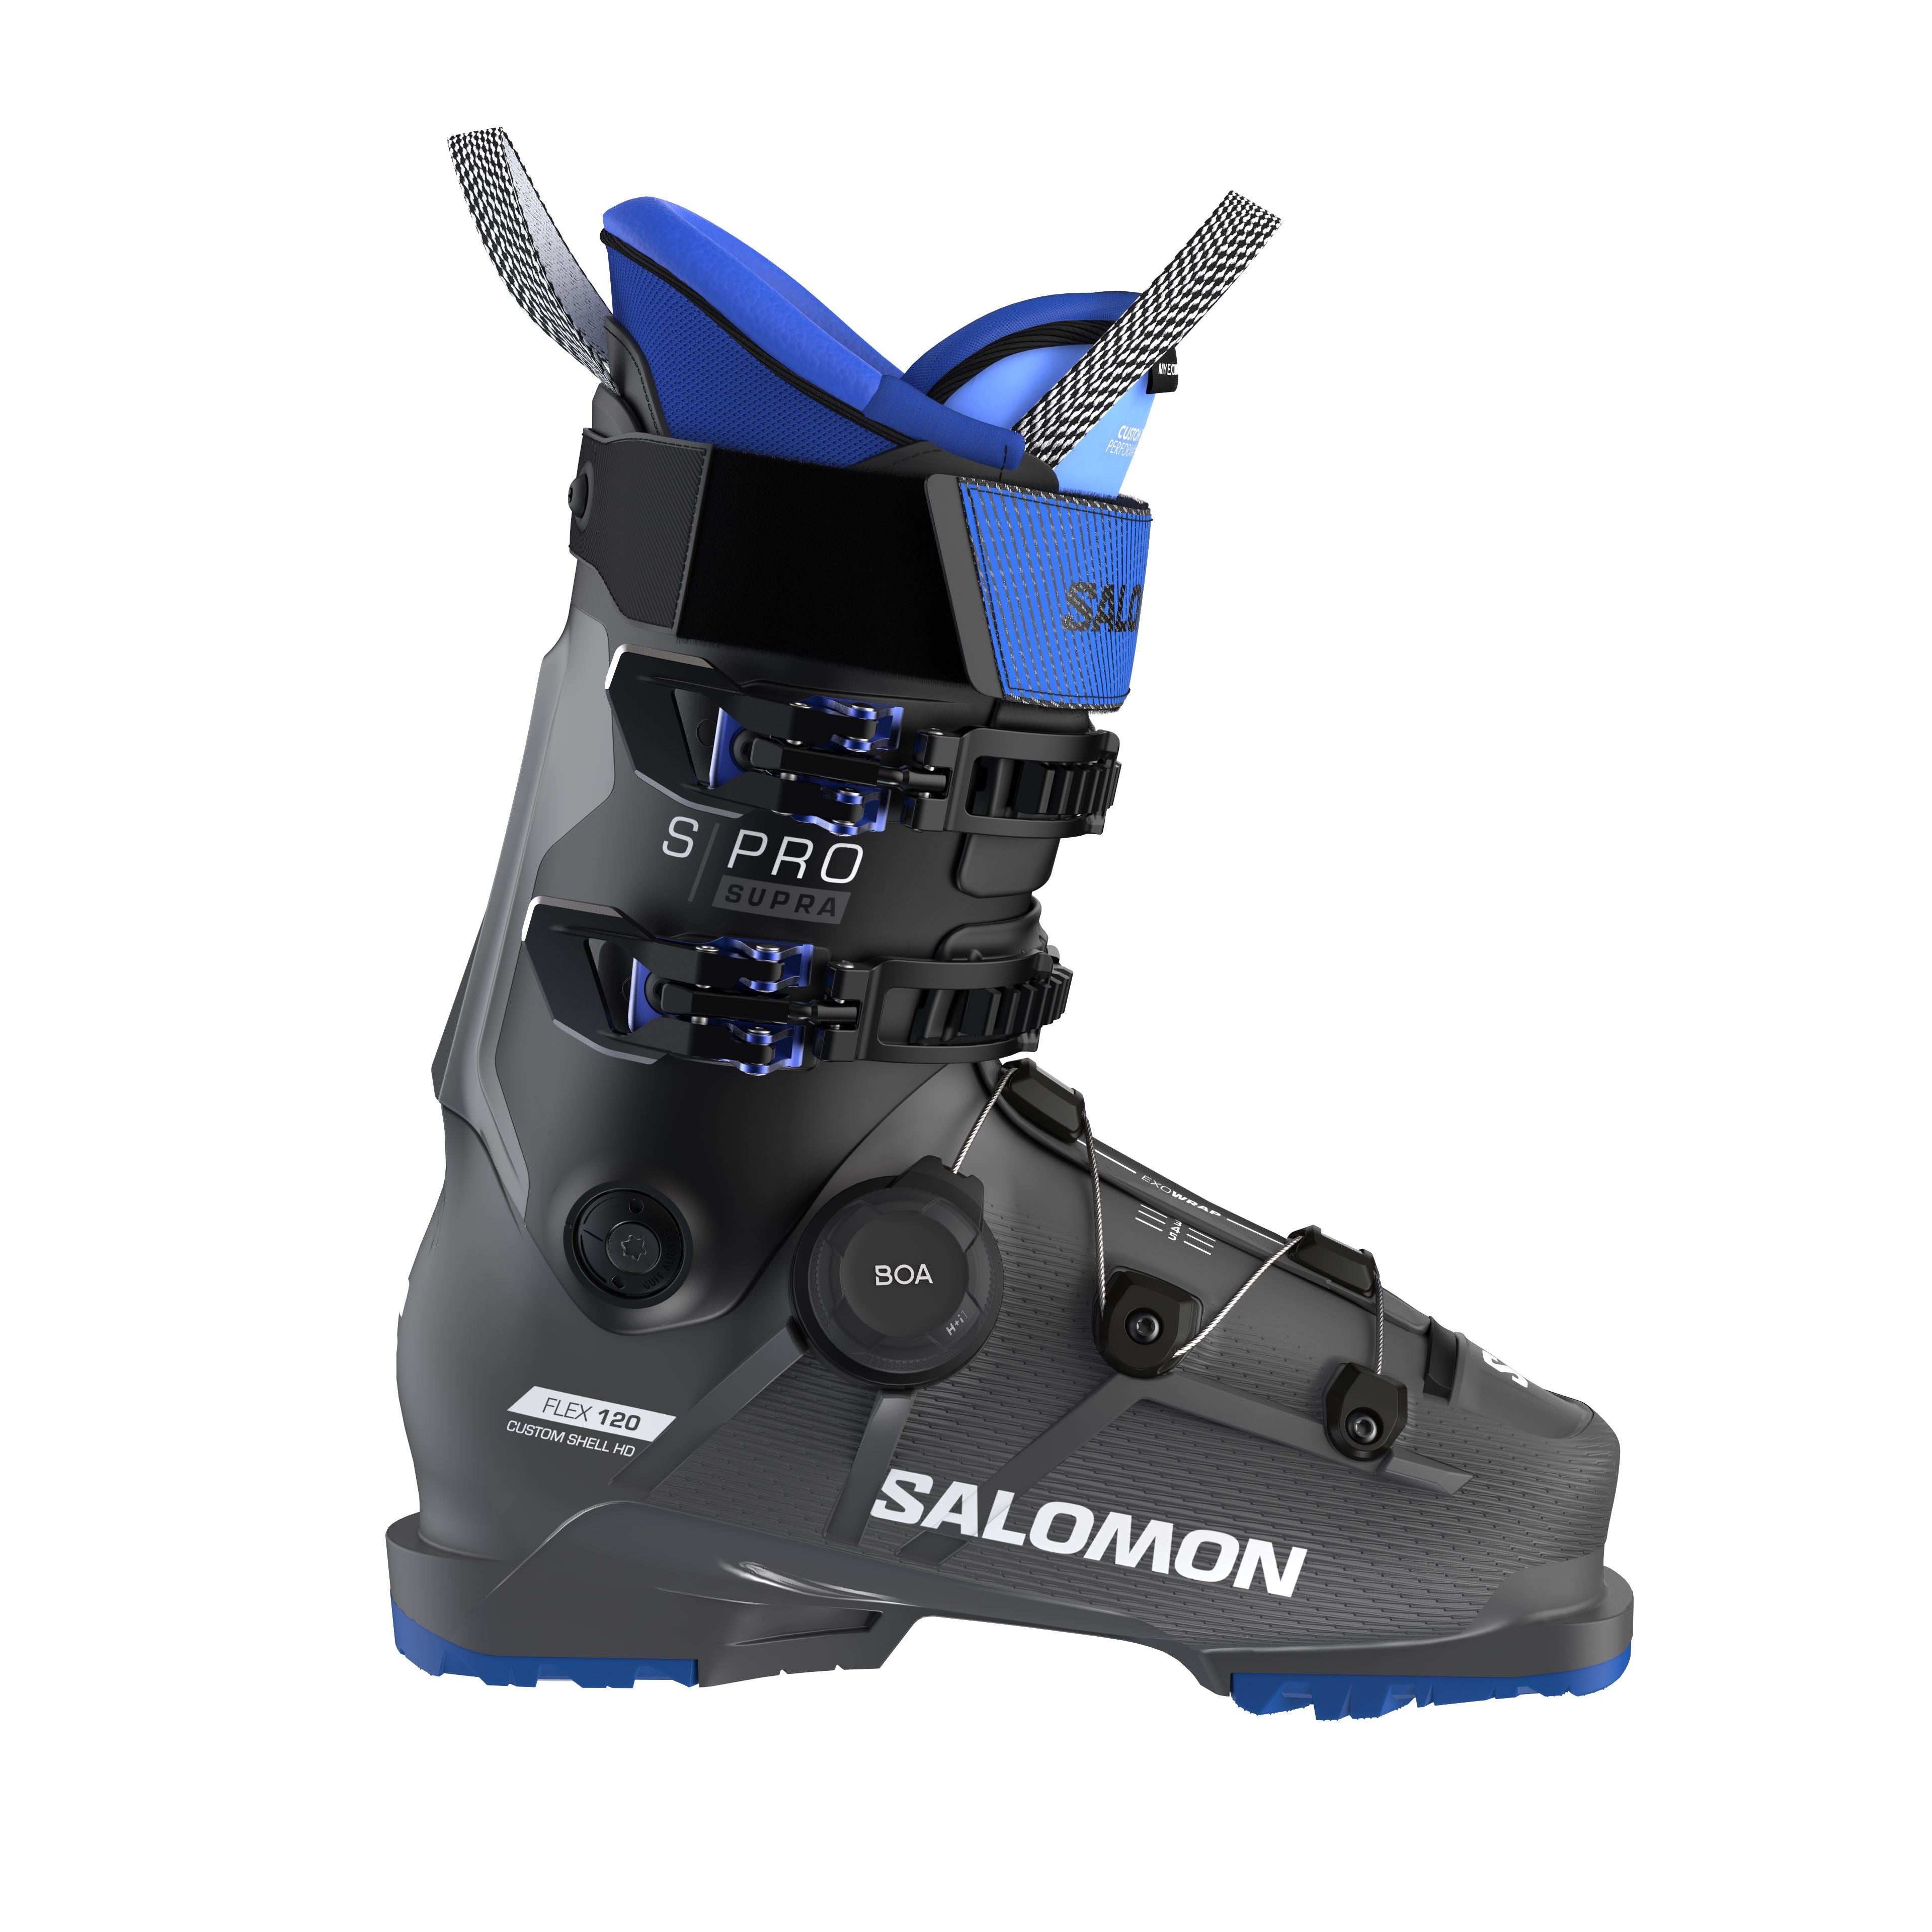 Ski Boot 101: How to buckle your ski boots - OnTheSnow